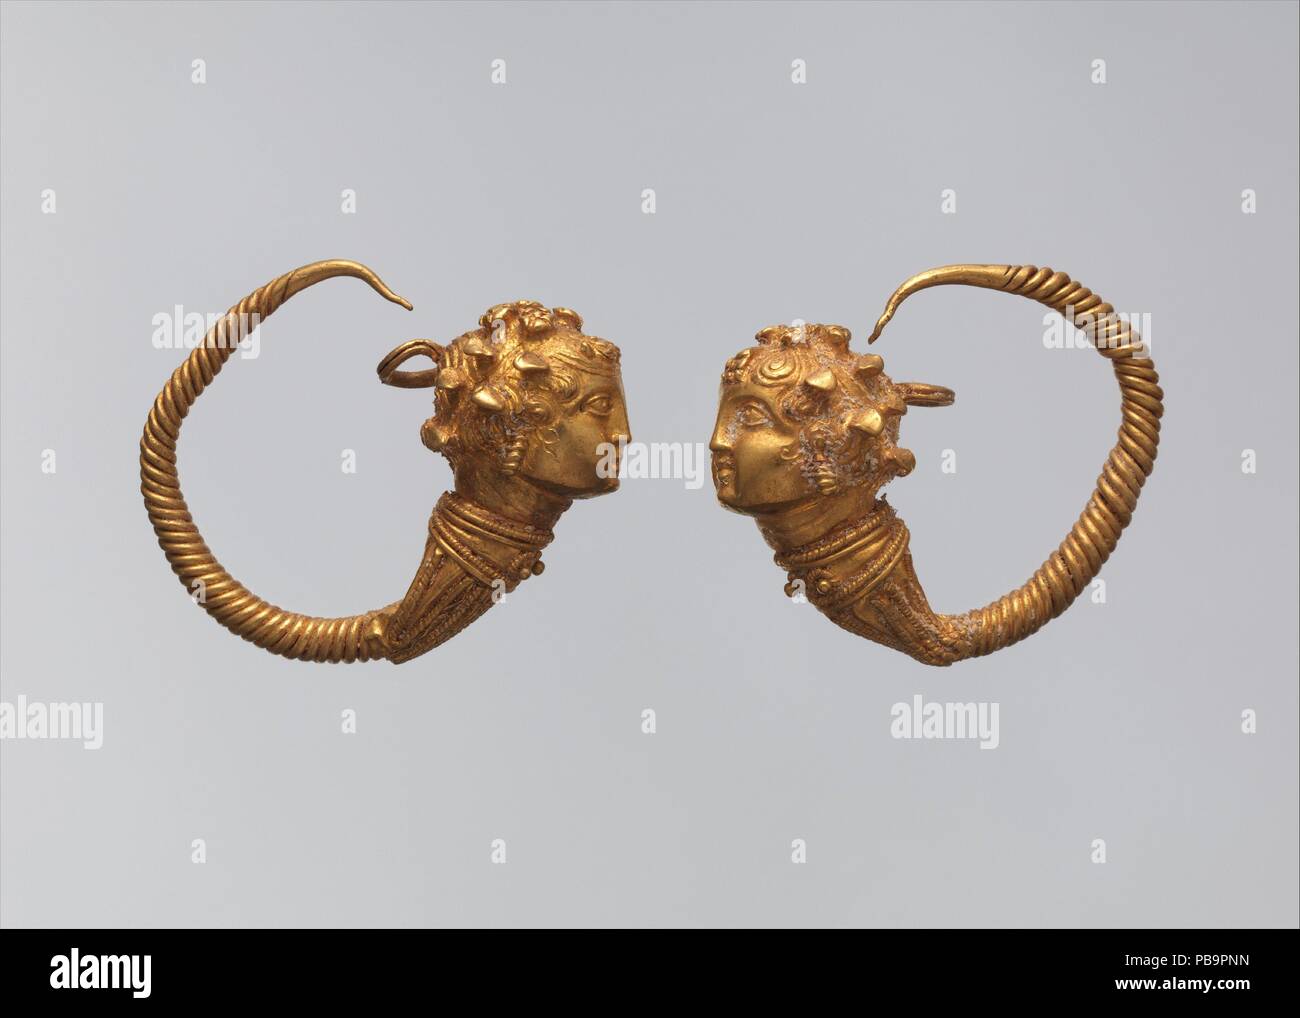 Maenad-head earrings. Dimensions: a. As Worn: H. 2.5 × W. 2.9 cm (1 × 1 1/8 in.)  b. As Worn: H. 2.4 × W. 2.7 cm (15/16 × 1 1/16 in.). Date: 1st century B.C..  Earrings with heads of maenads (Dionysus's female followers) are rare in Egypt but occur in the Levant and Cyprus. The form is late Hellenistic. Museum: Metropolitan Museum of Art, New York, USA. Stock Photo